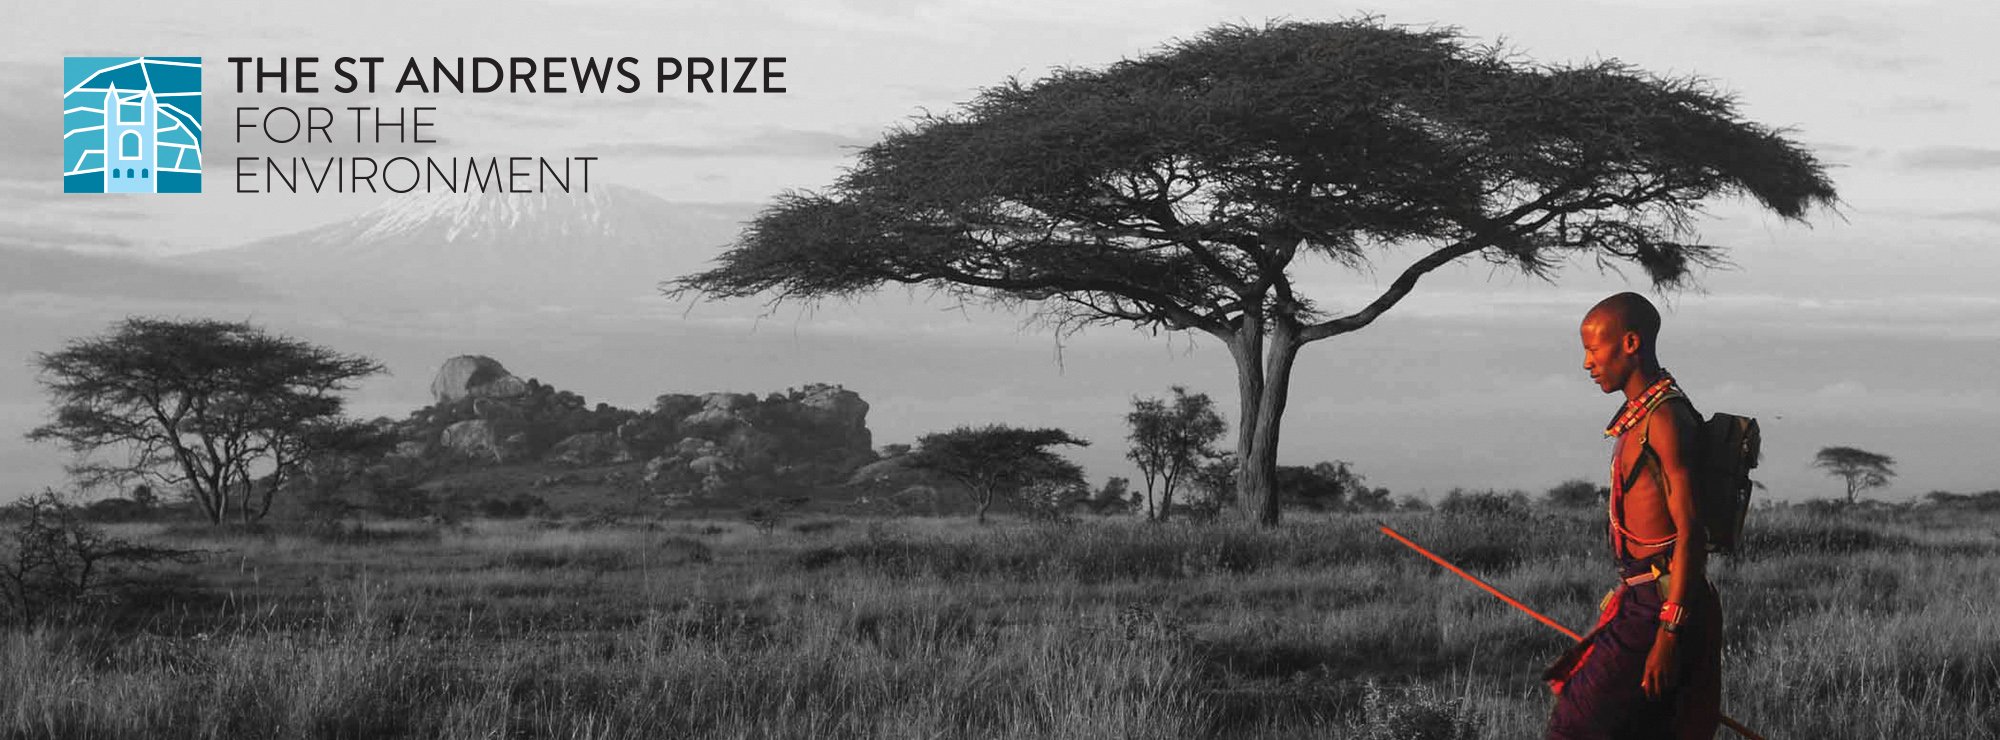 2019 ST ANDREWS PRIZE OPENS FOR ENTRIES